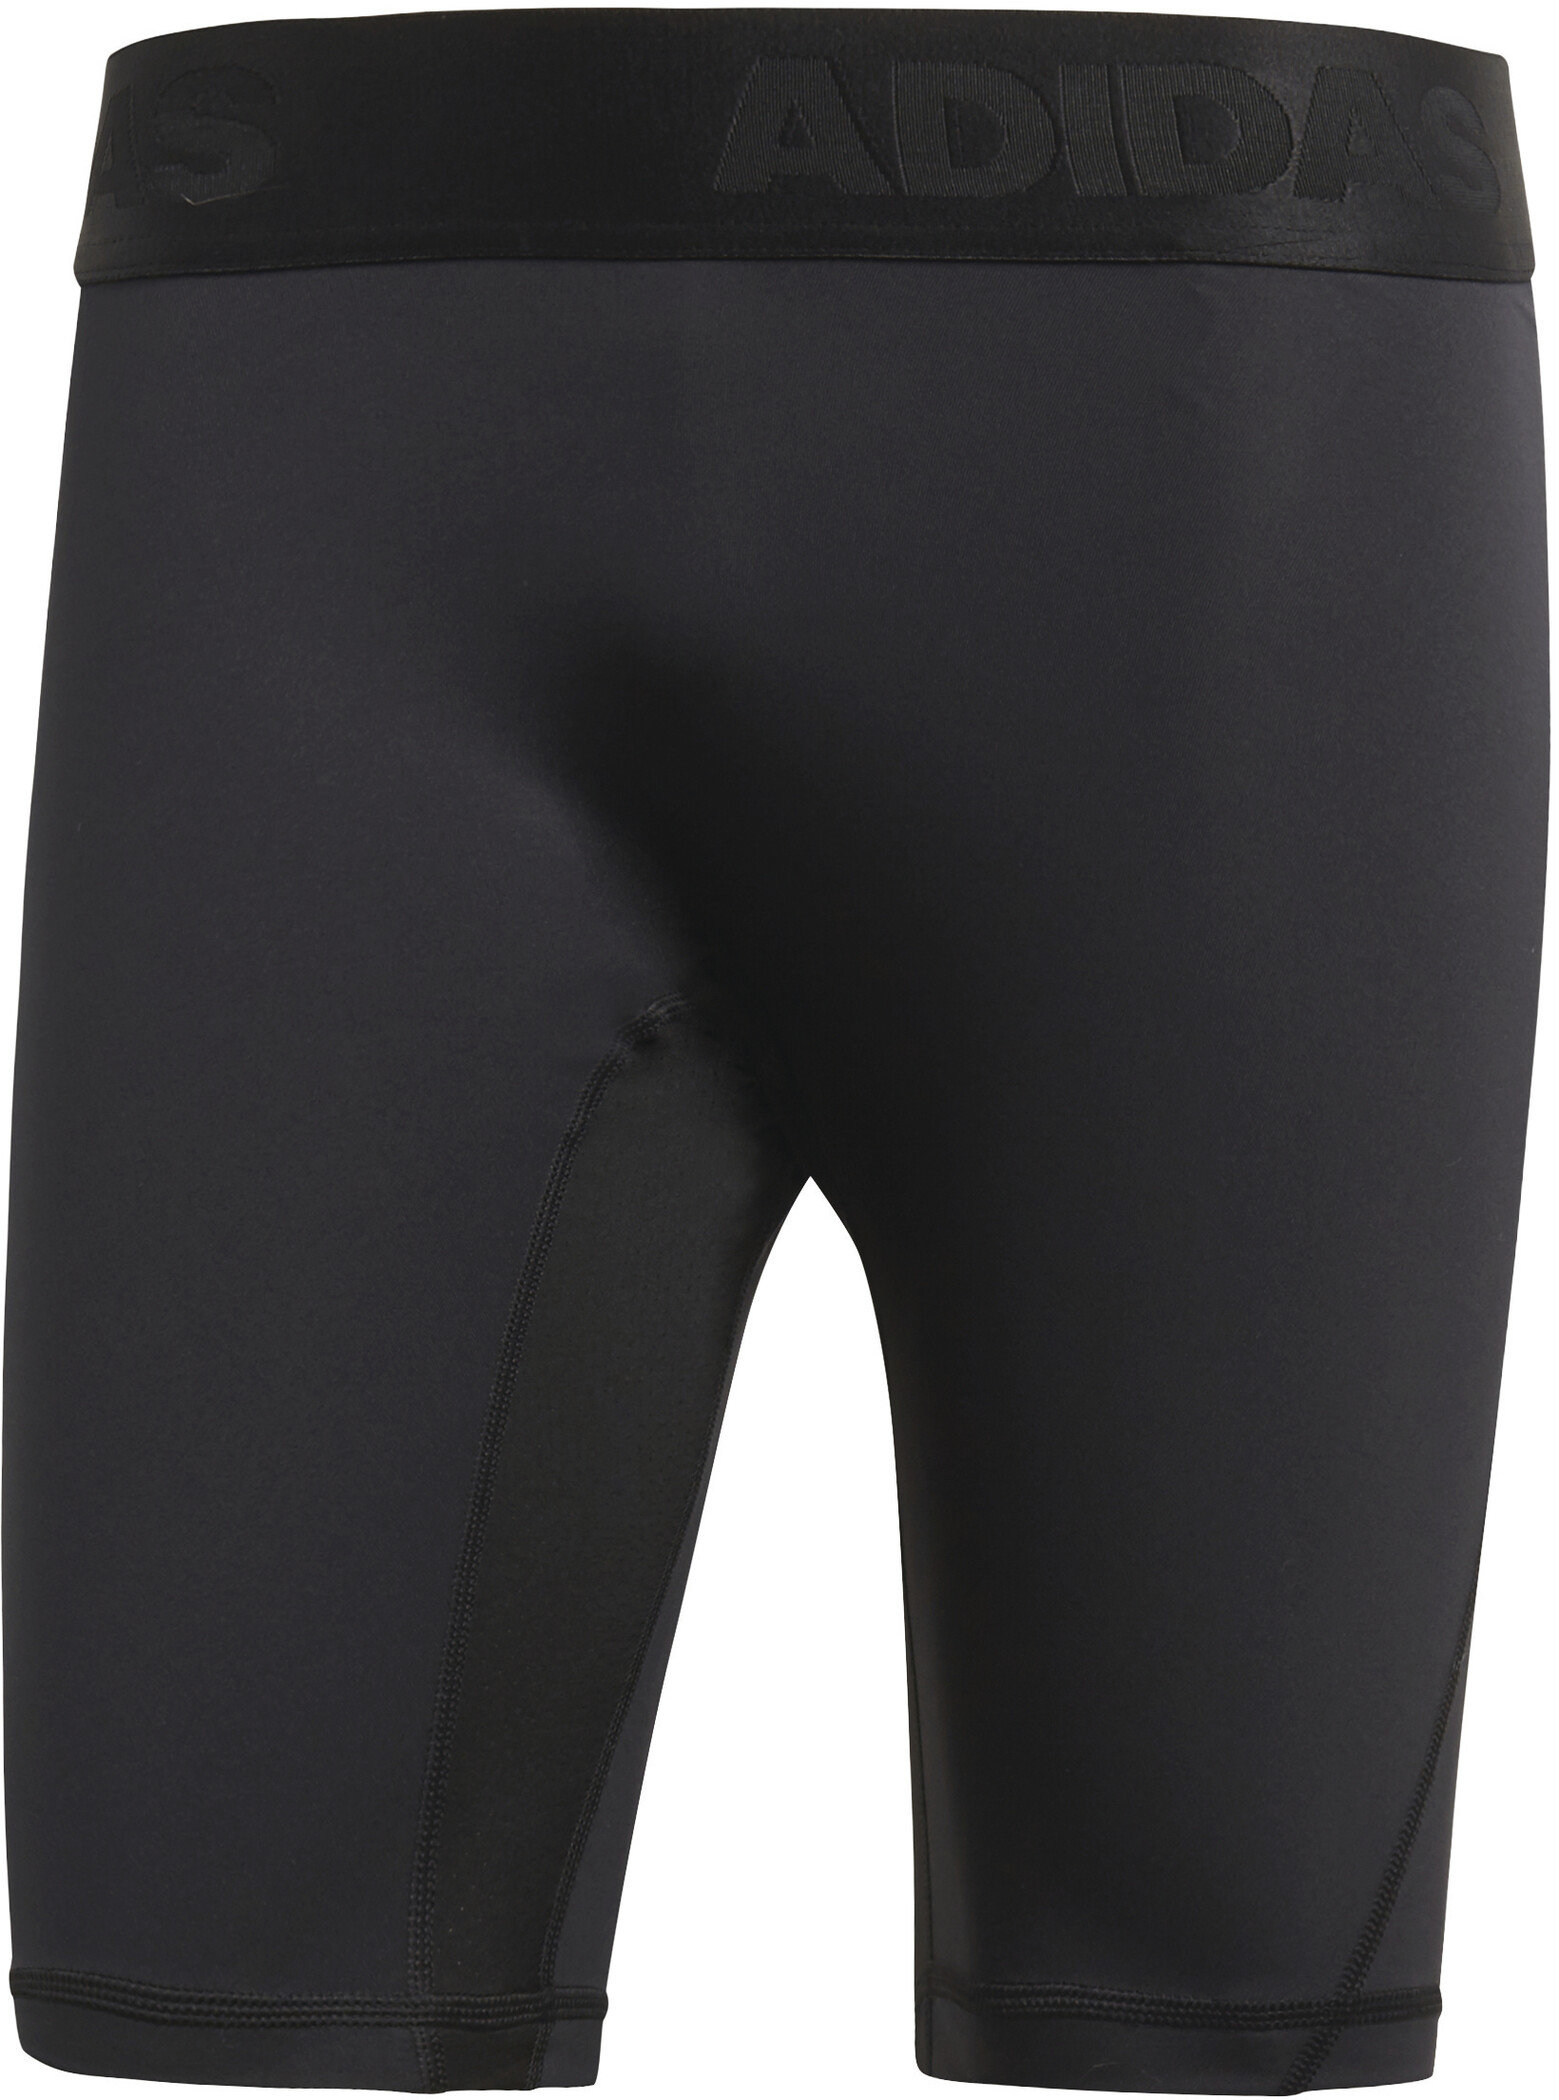 adidas training alphaskin booty shorts with side logo in black